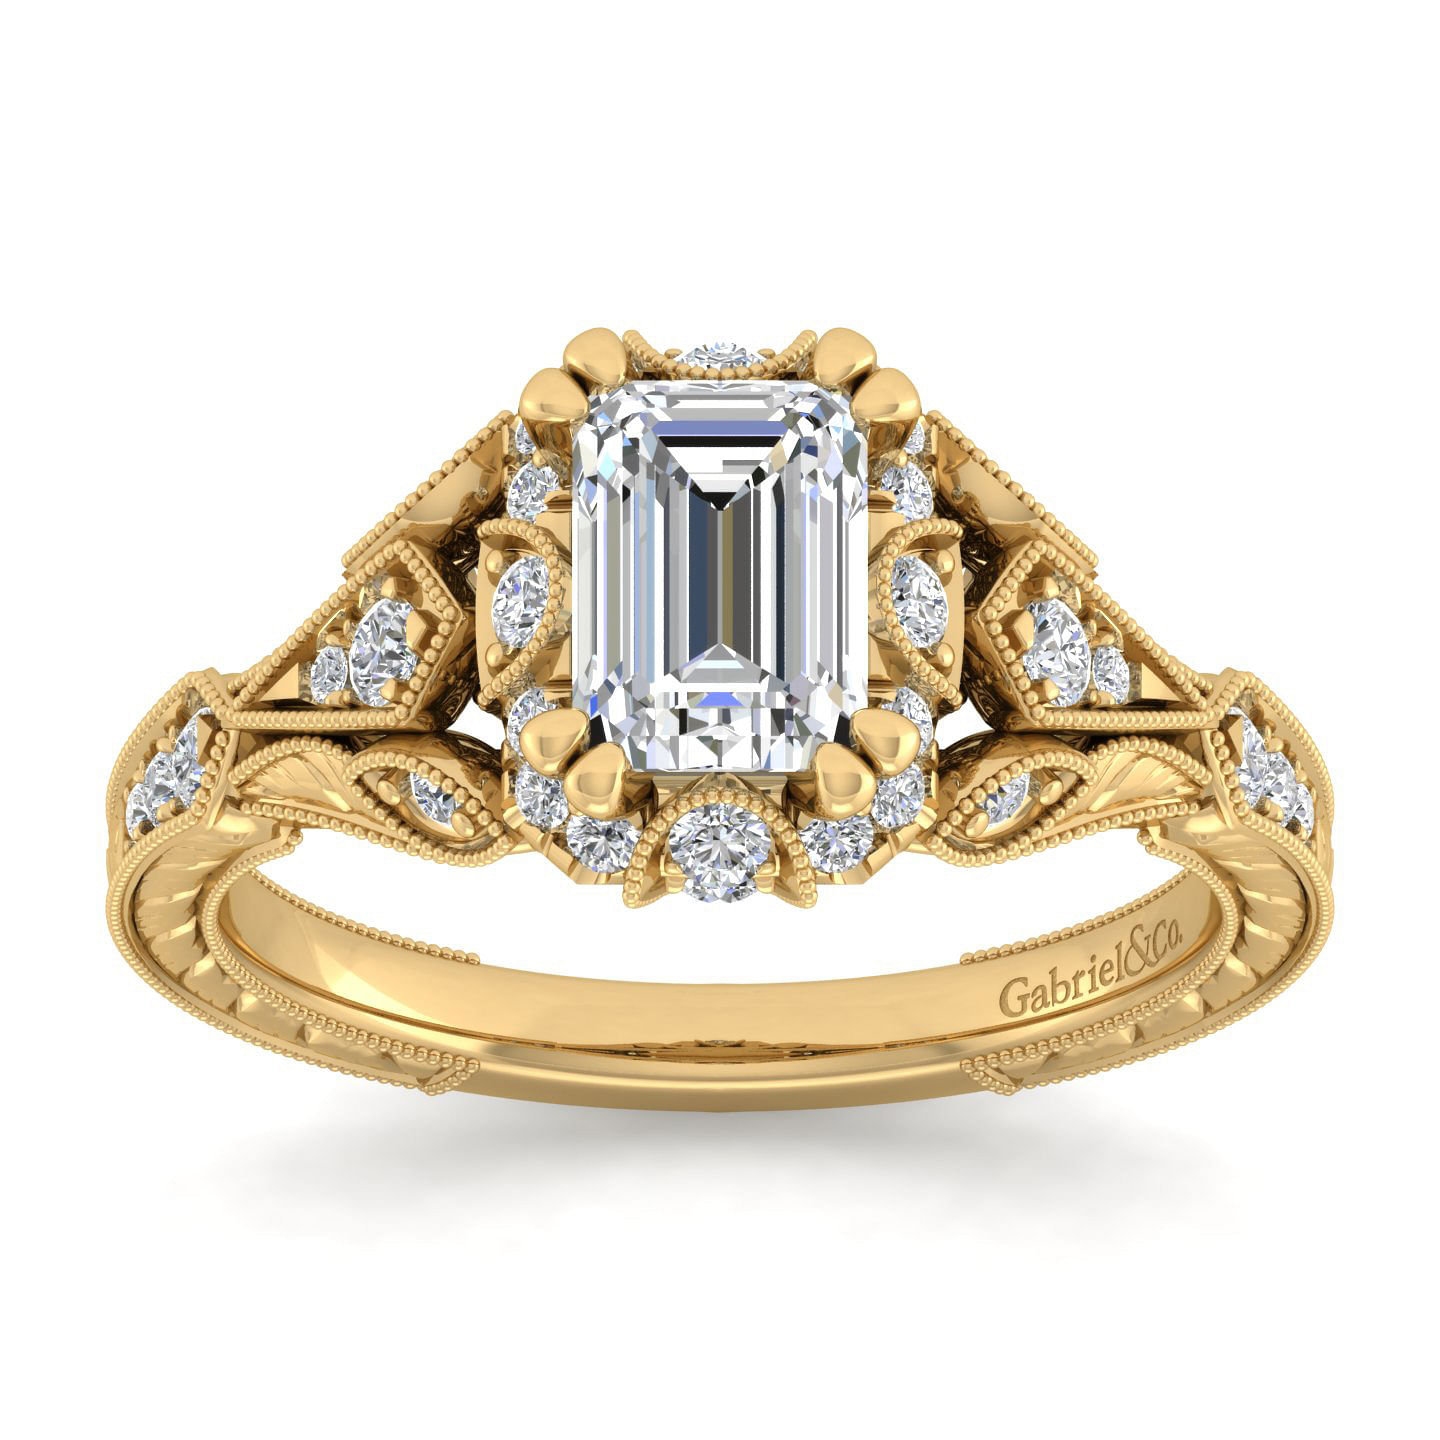 Unique 14K Yellow Gold Vintage Inspired Emerald Cut Diamond Halo Engagement Ring